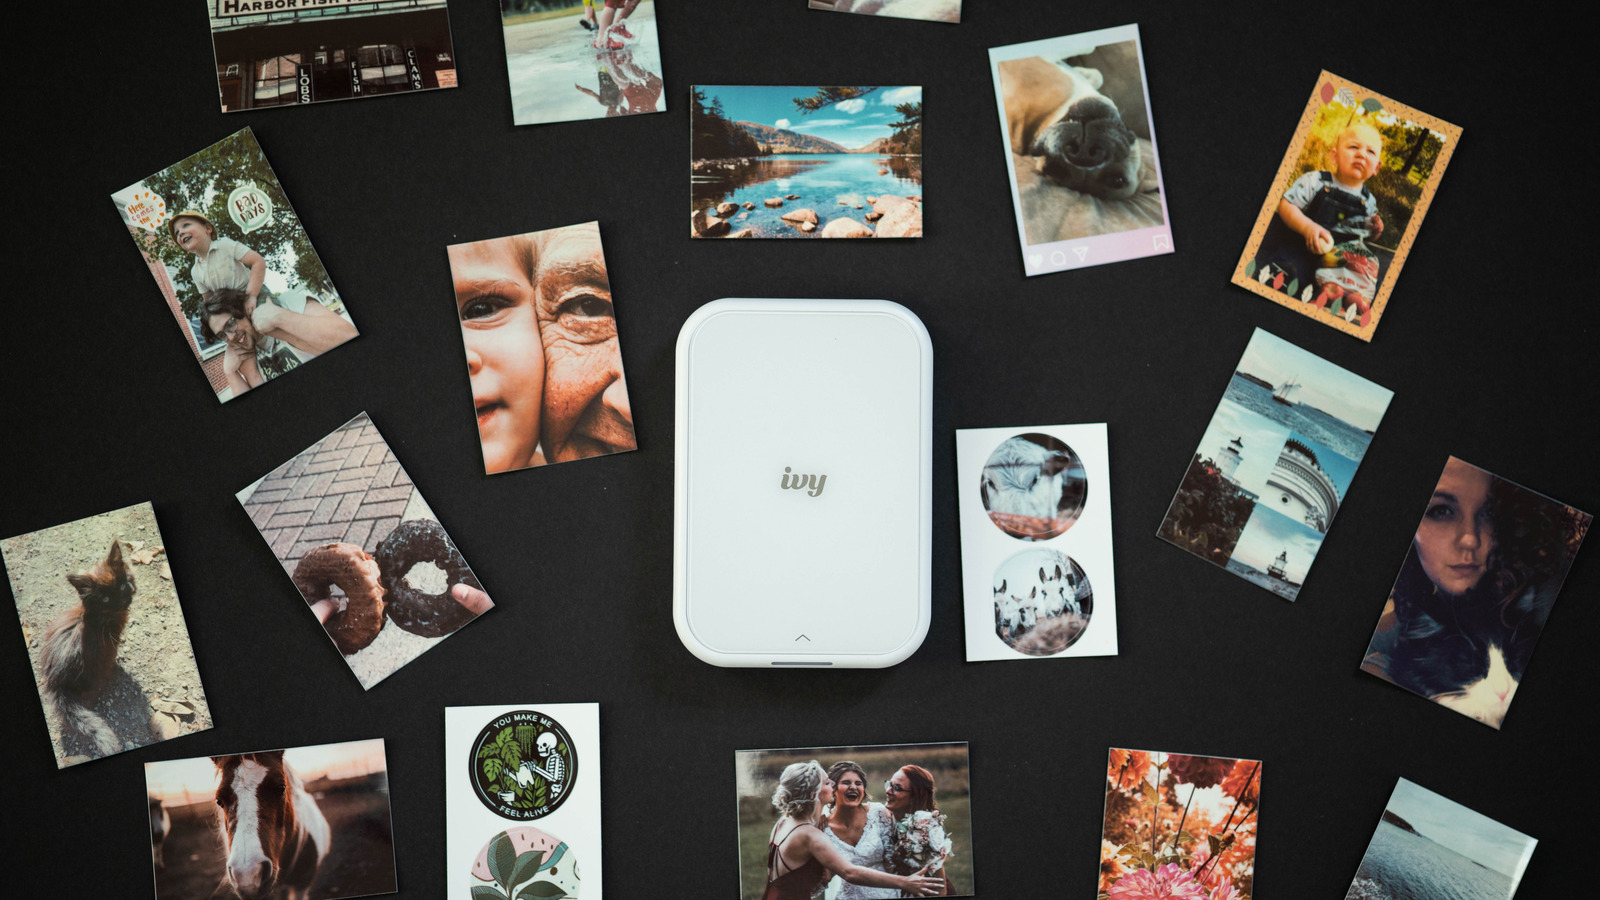 Canon's IVY mini photo printer is designed for the smartphone generation